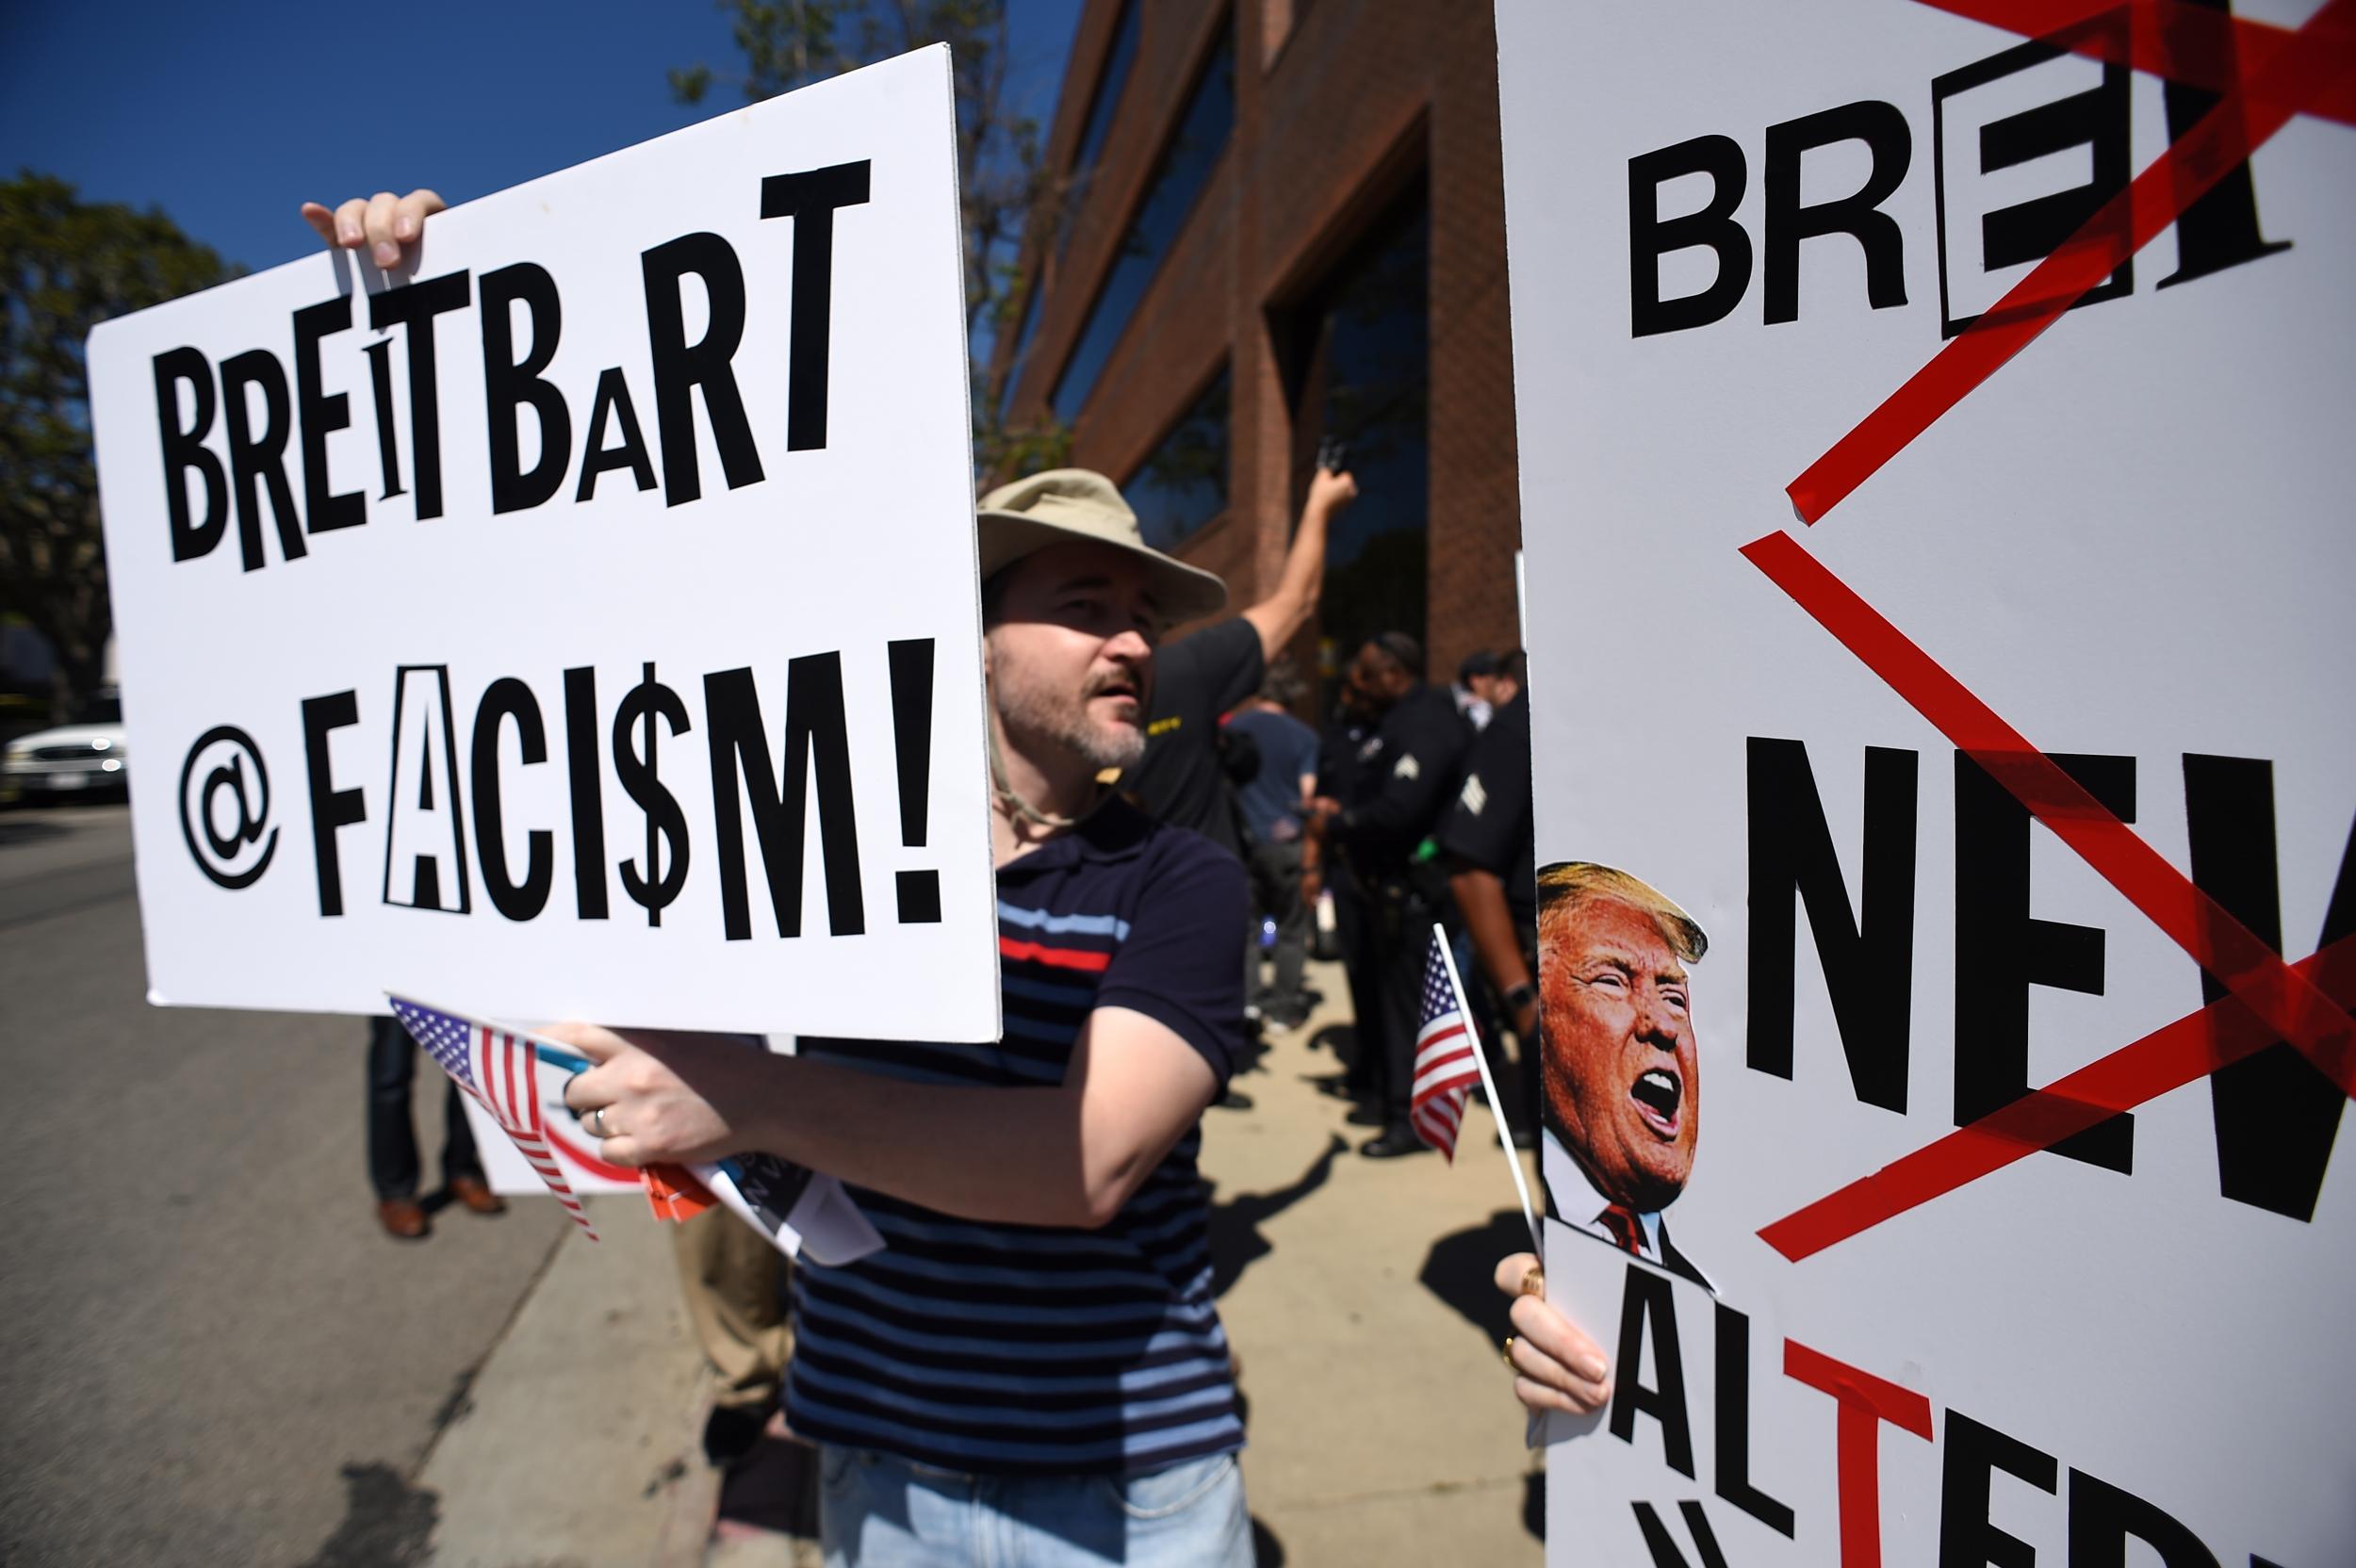 Breitbart gained prominence as a deeply divisive mouthpiece for many supporters of US President Donald Trump ahead of last year’s election